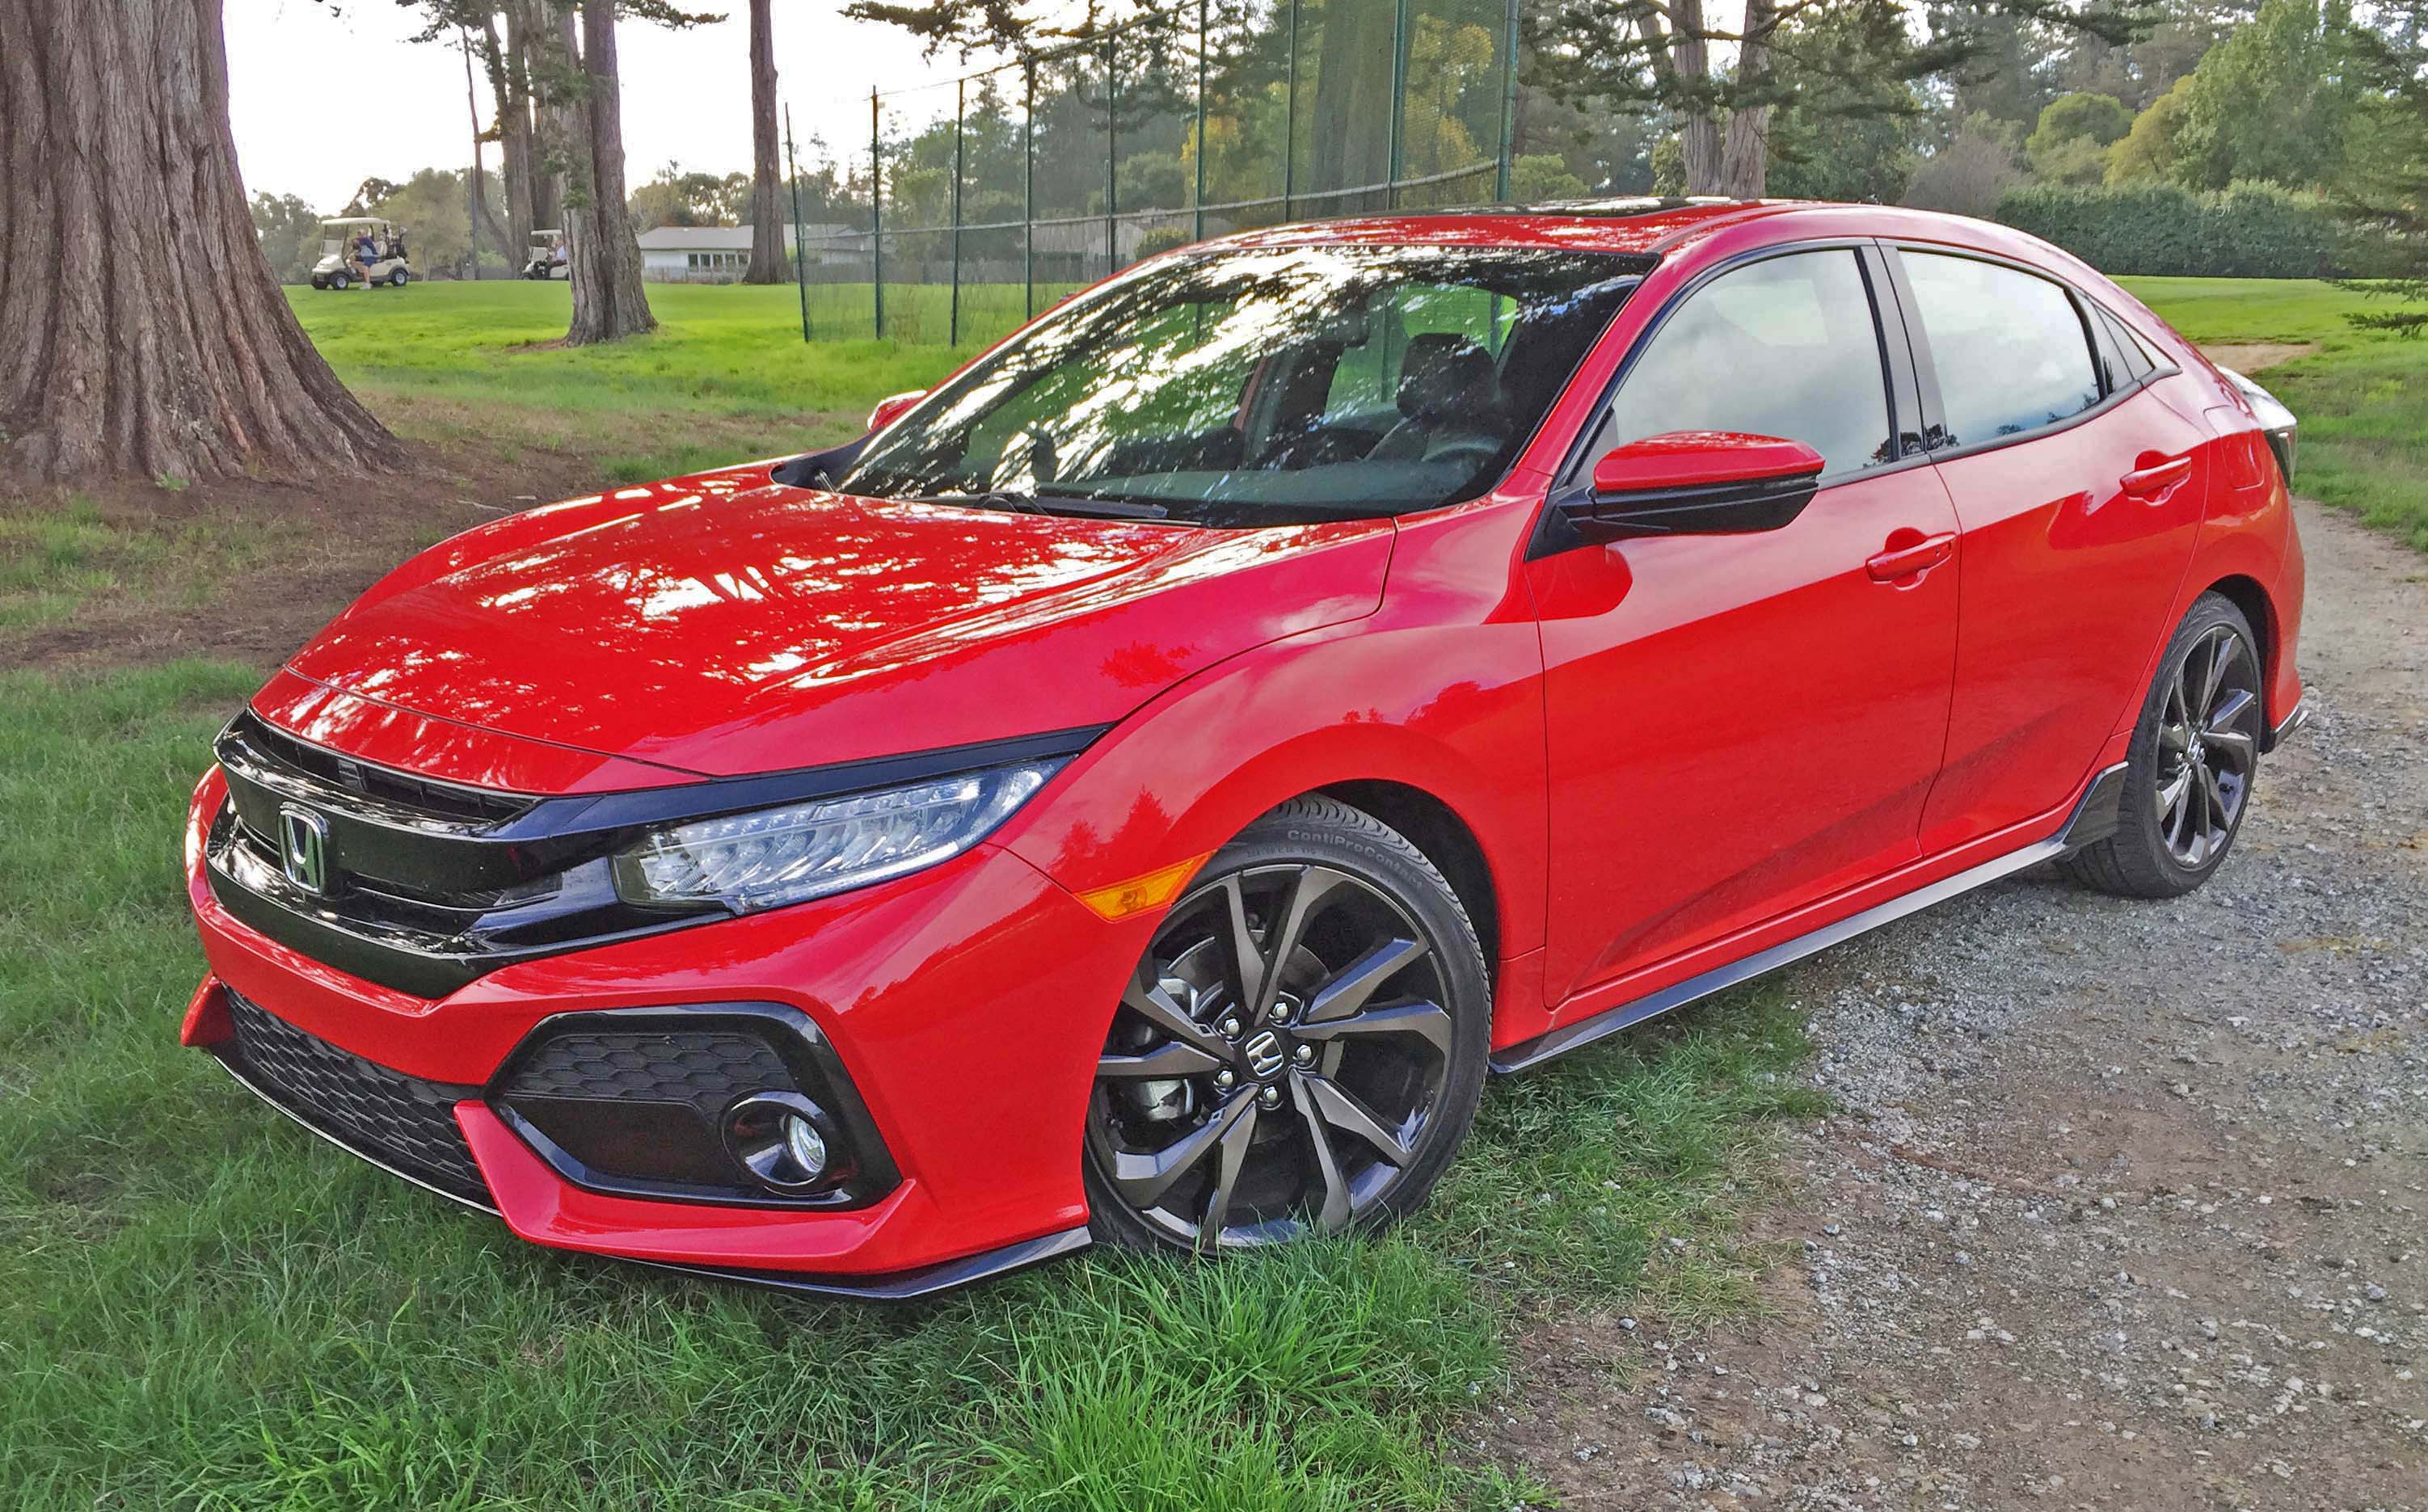 The 2017 Honda Civic Hatchback Displays An Ideal Balance Of Form And